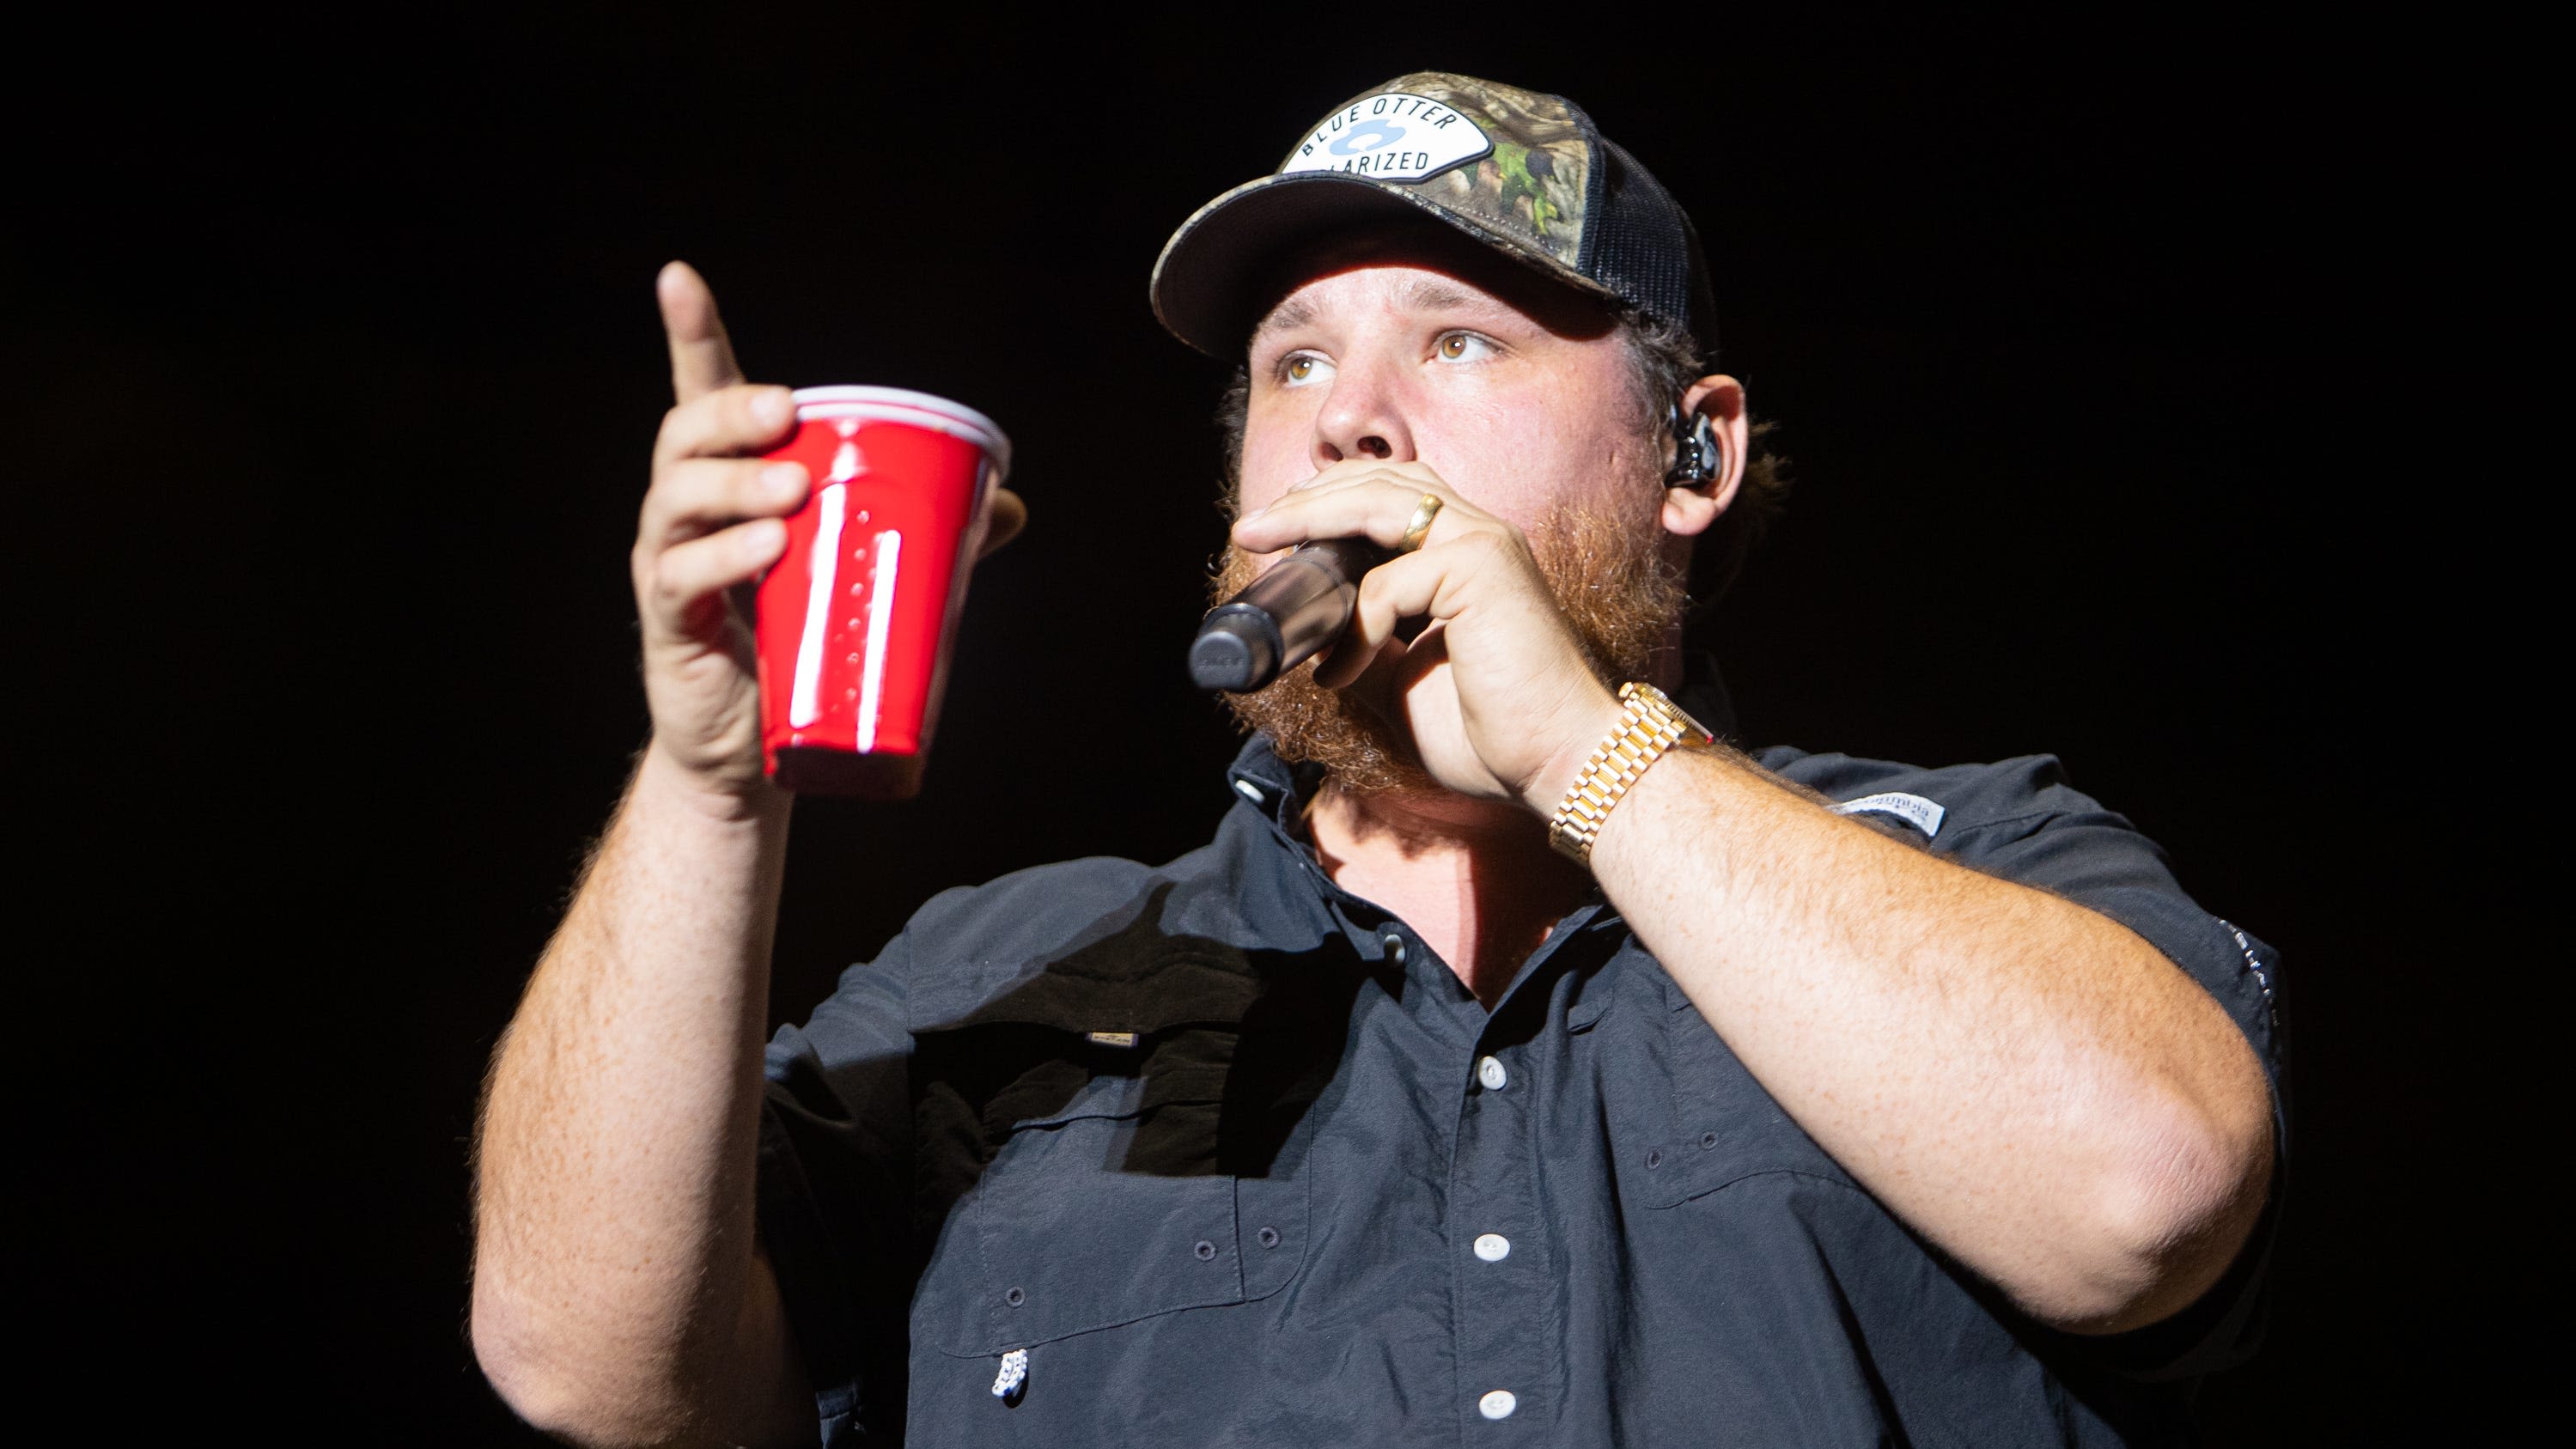 Luke Combs is coming to Phoenix. So is the traffic. How to minimize the aggravation